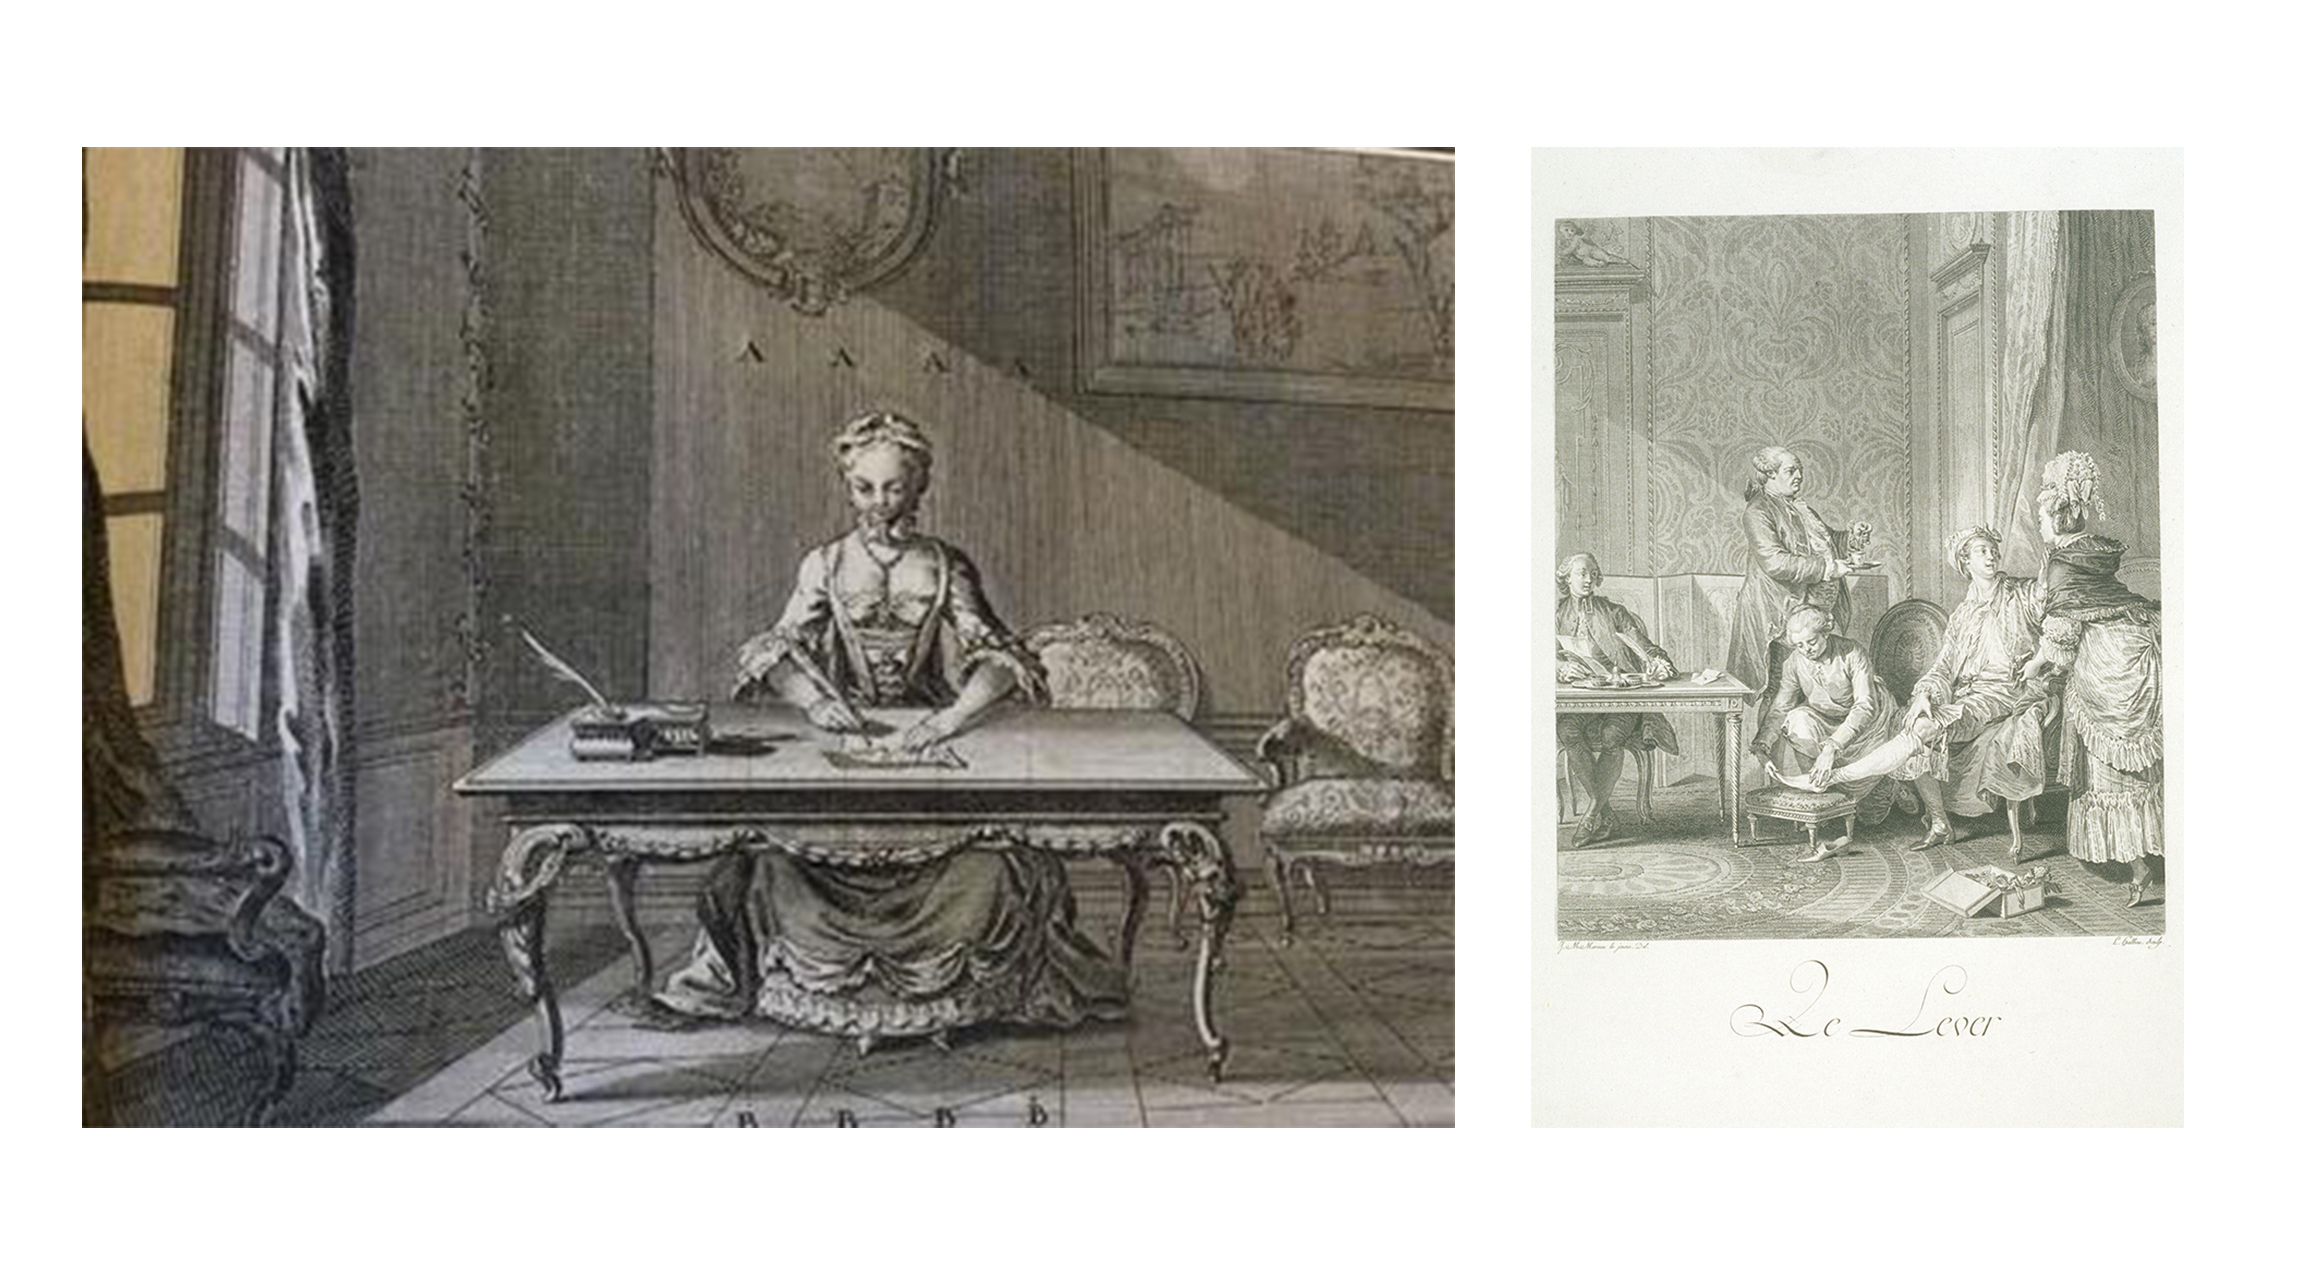 left: woman seated at a desk writing a letter with a quill pen; right: one man seated with servants dressing him; another seated man behind table, writing 